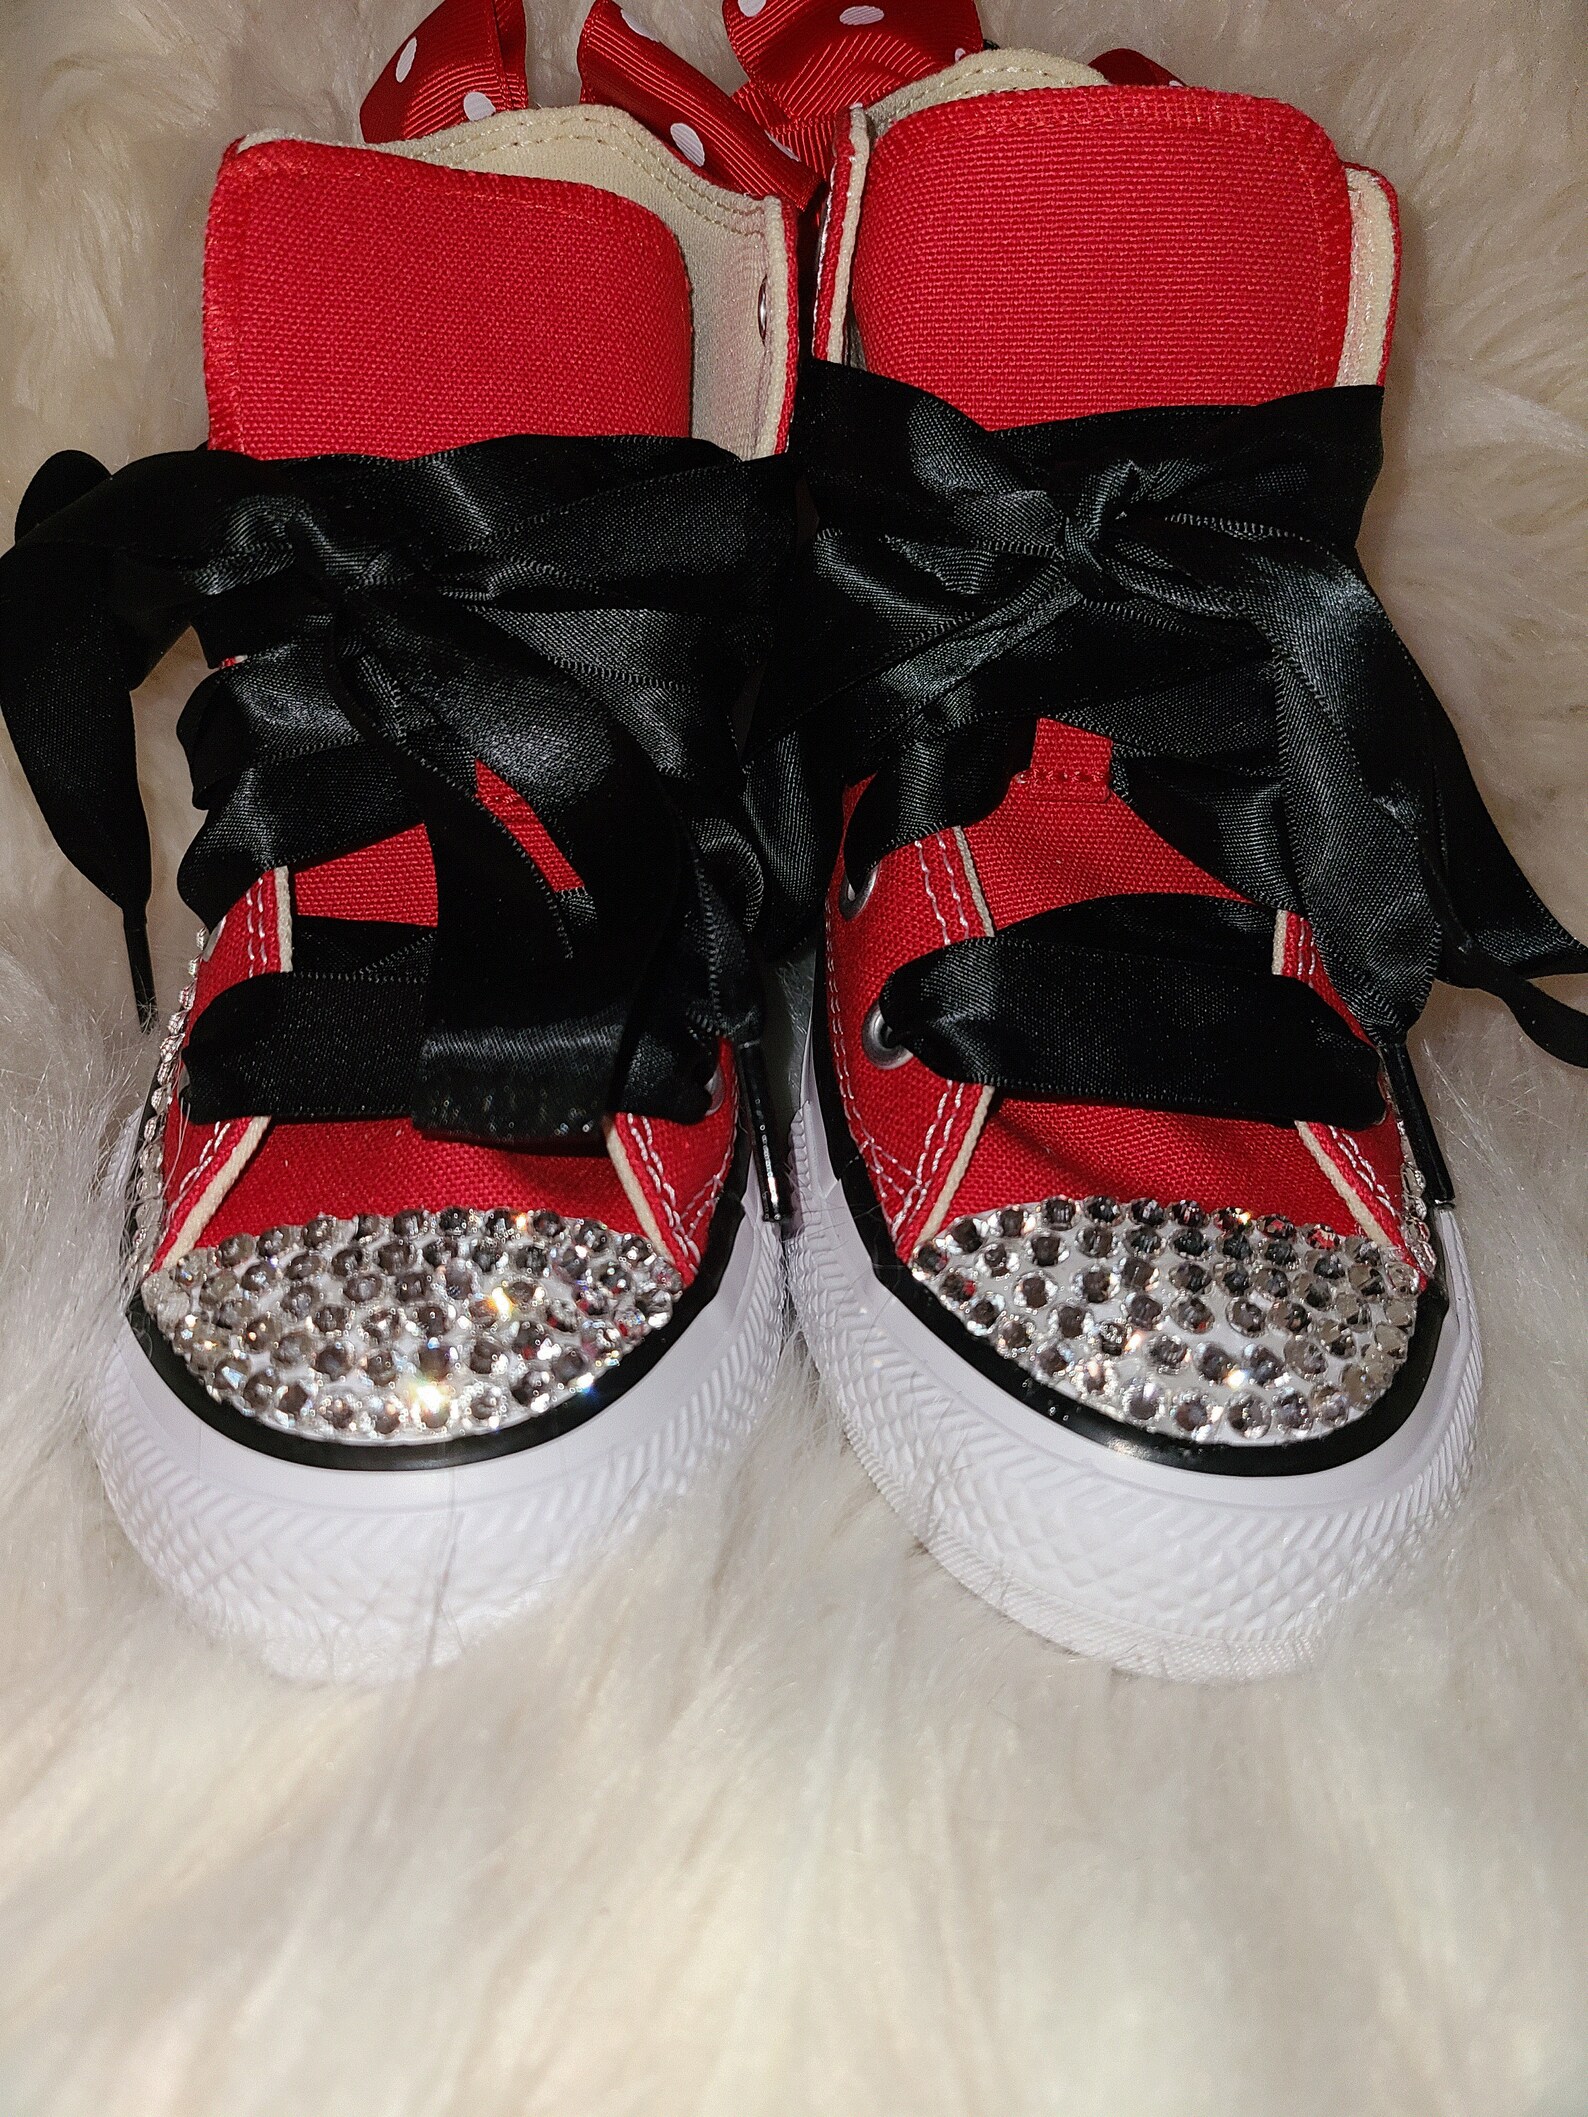 Mouse Girl Bling Converse - Etsy